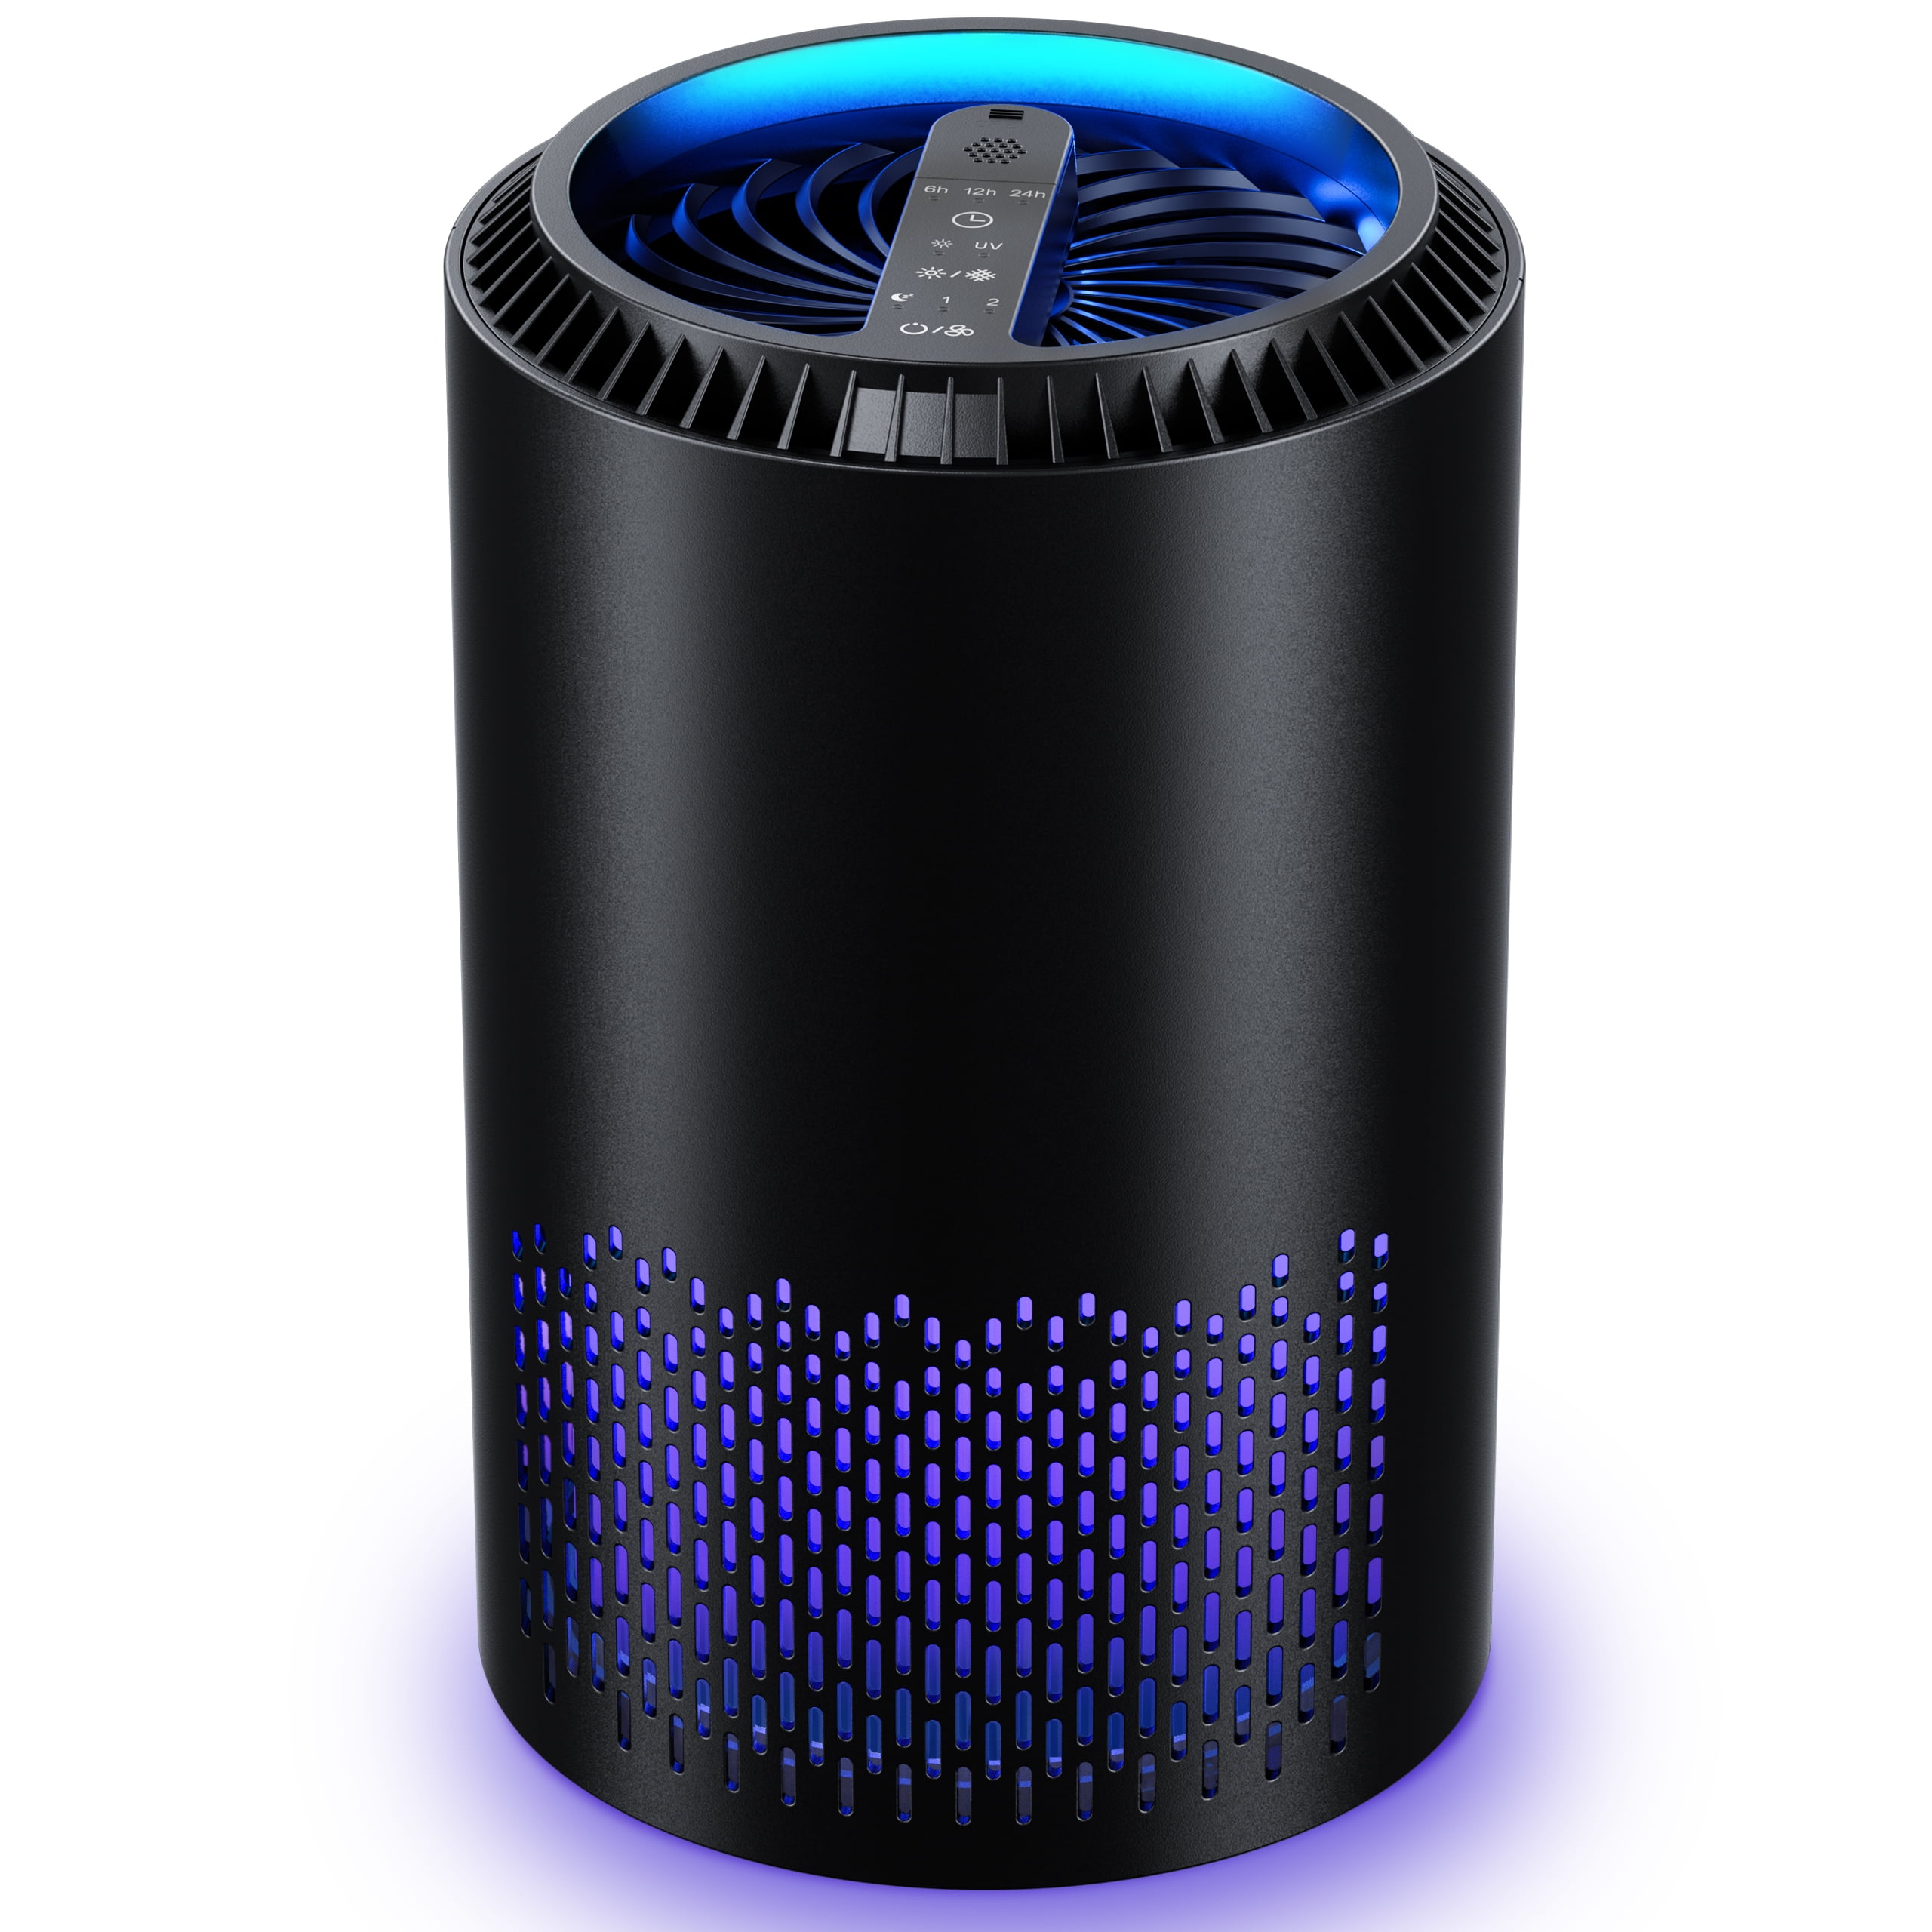 TKM Home Dh-Jh01 Air Purifier - H13 Hepa - 99.9% Removal ,Black